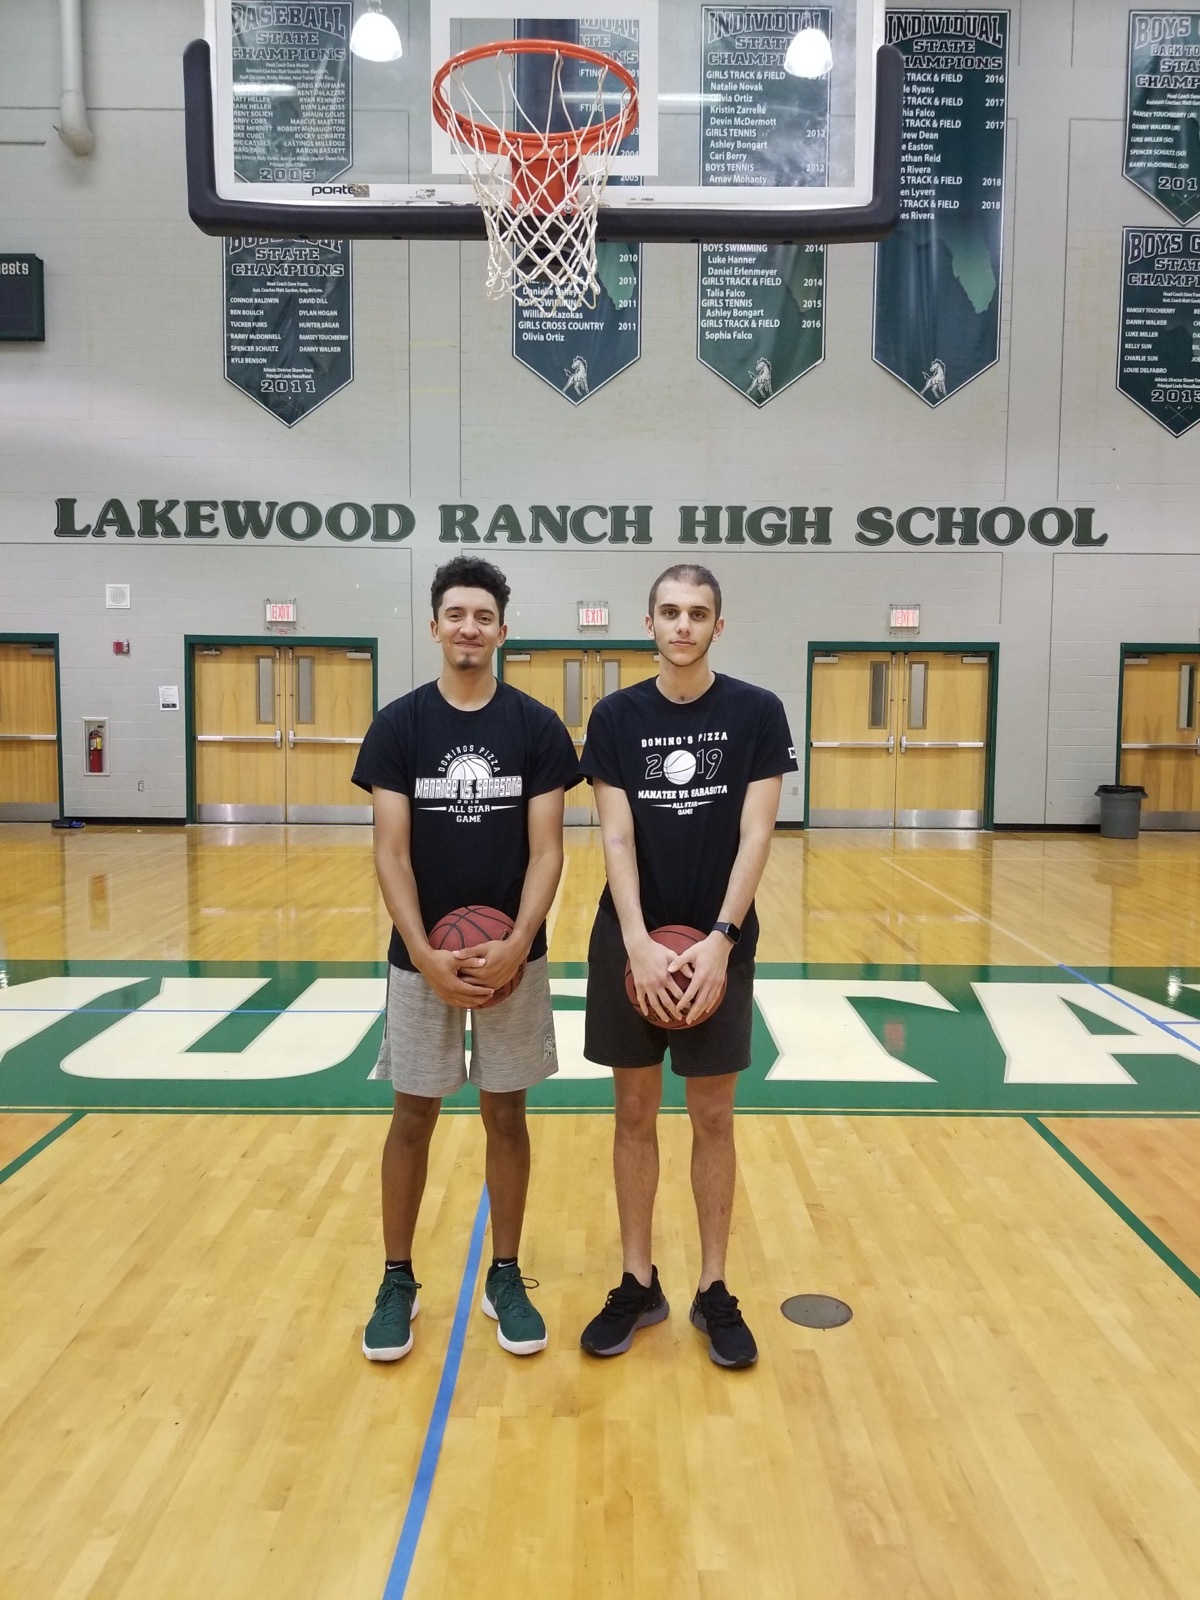 Former Lakewood Ranch High basketball stars Evan Spiller and Jack Kelley hit the gym together to shoot hoops.